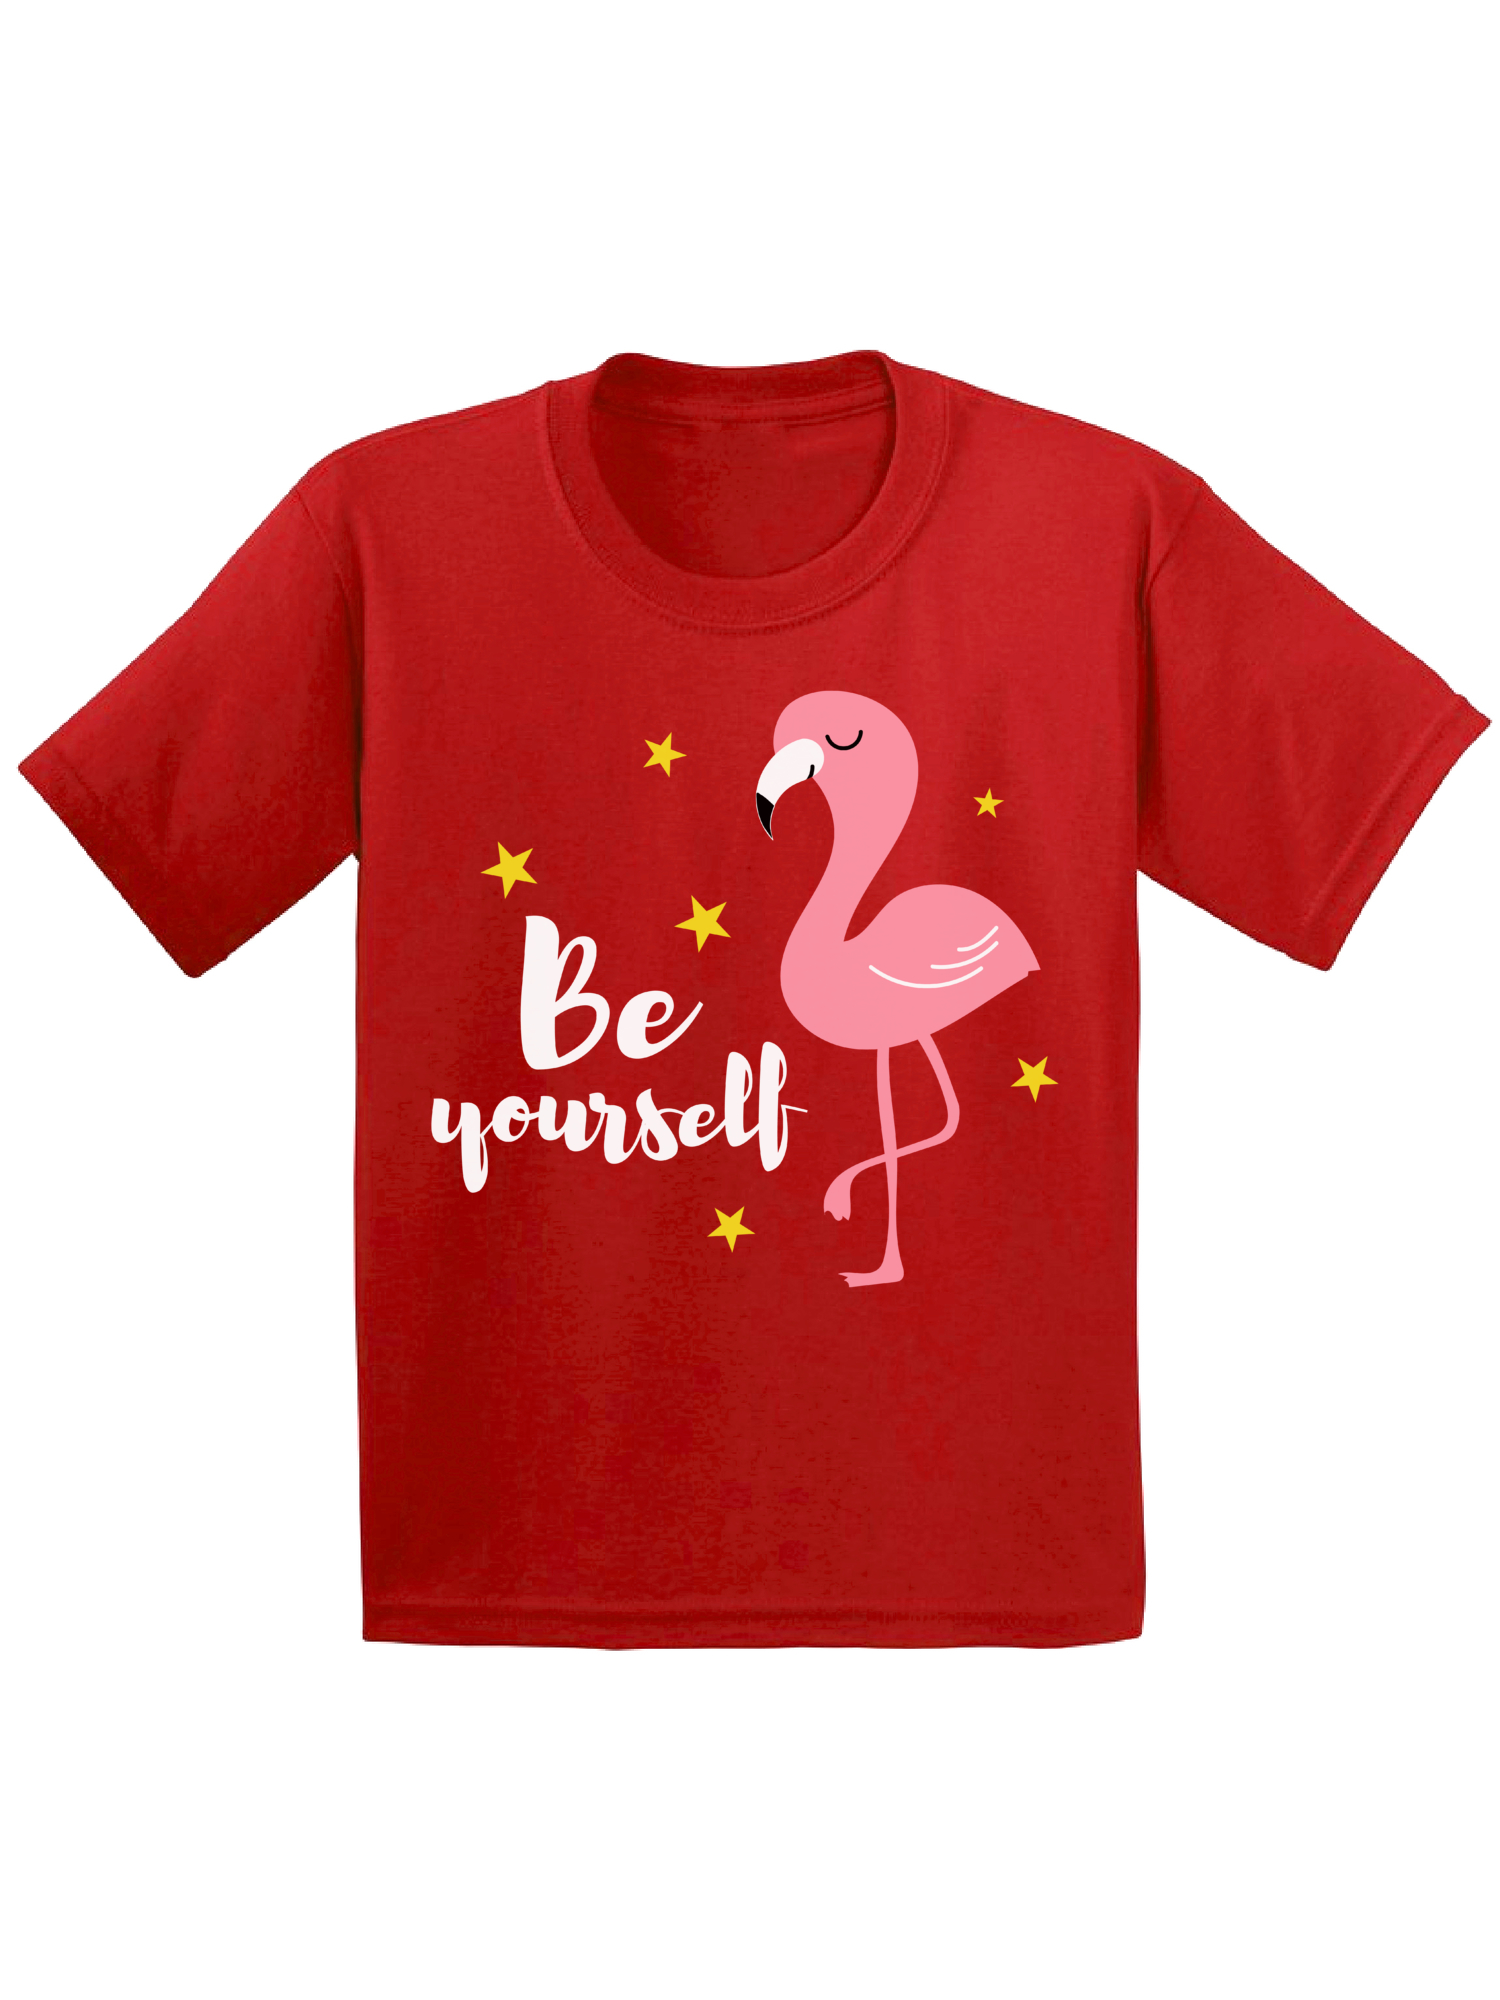 Awkward Styles Be Yourself Infant Shirt Cute Summer Shirt for Kids Pink Flamingo T Shirt for Boys Pink Flamingo Shirts for Girls Cute Flamingo T-Shirt for Children Summer Gifts for Little One - image 1 of 4